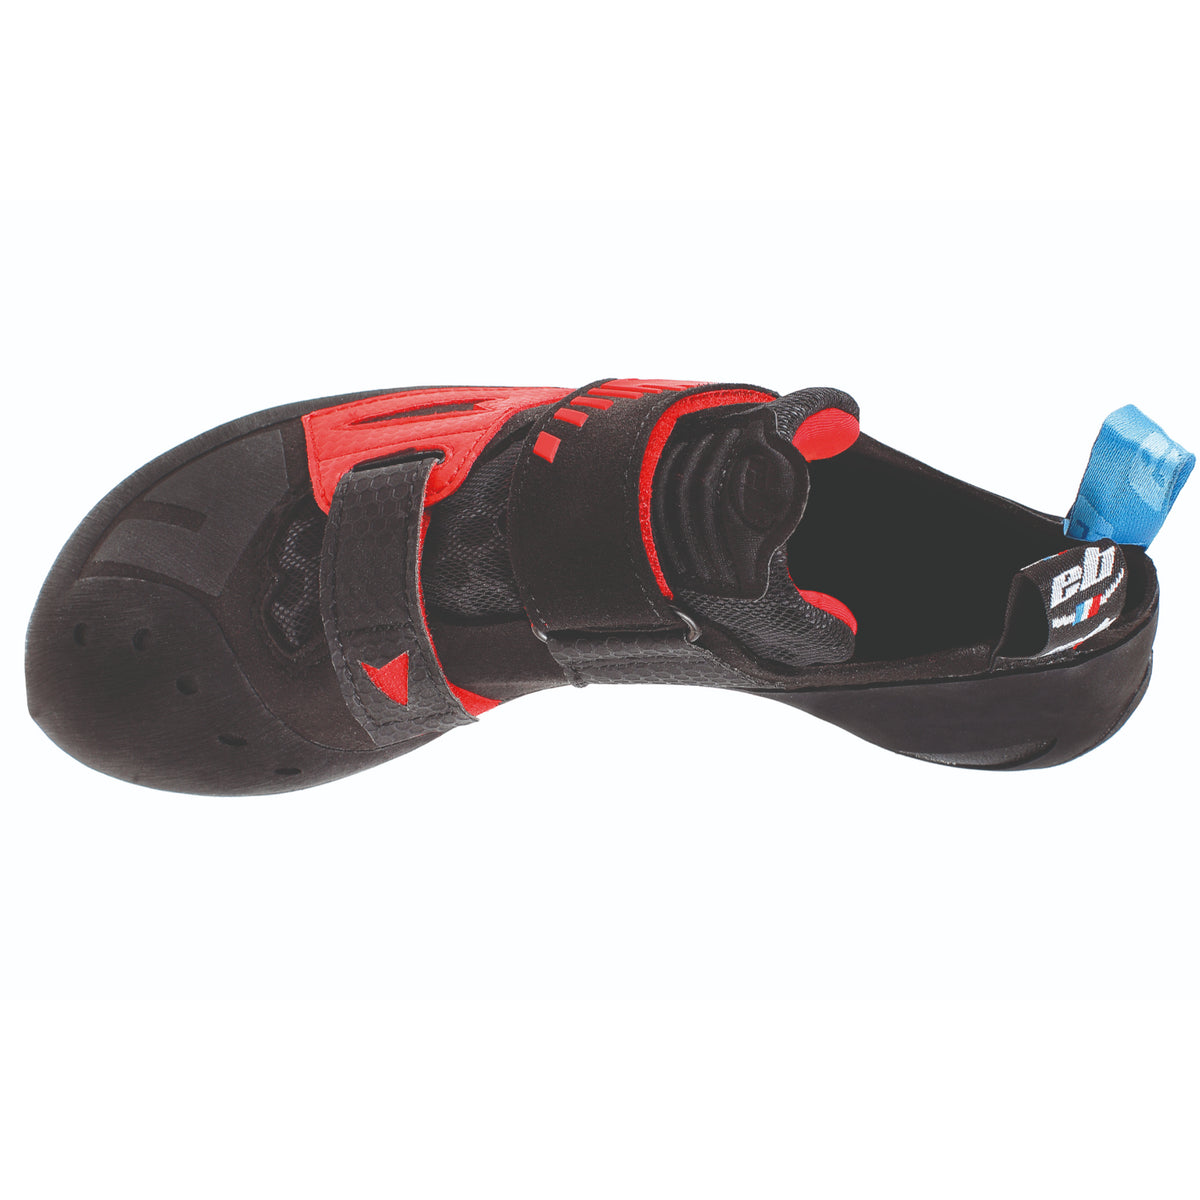 EB Red climbing shoe from above showing toe rubber patch strapping and tongue